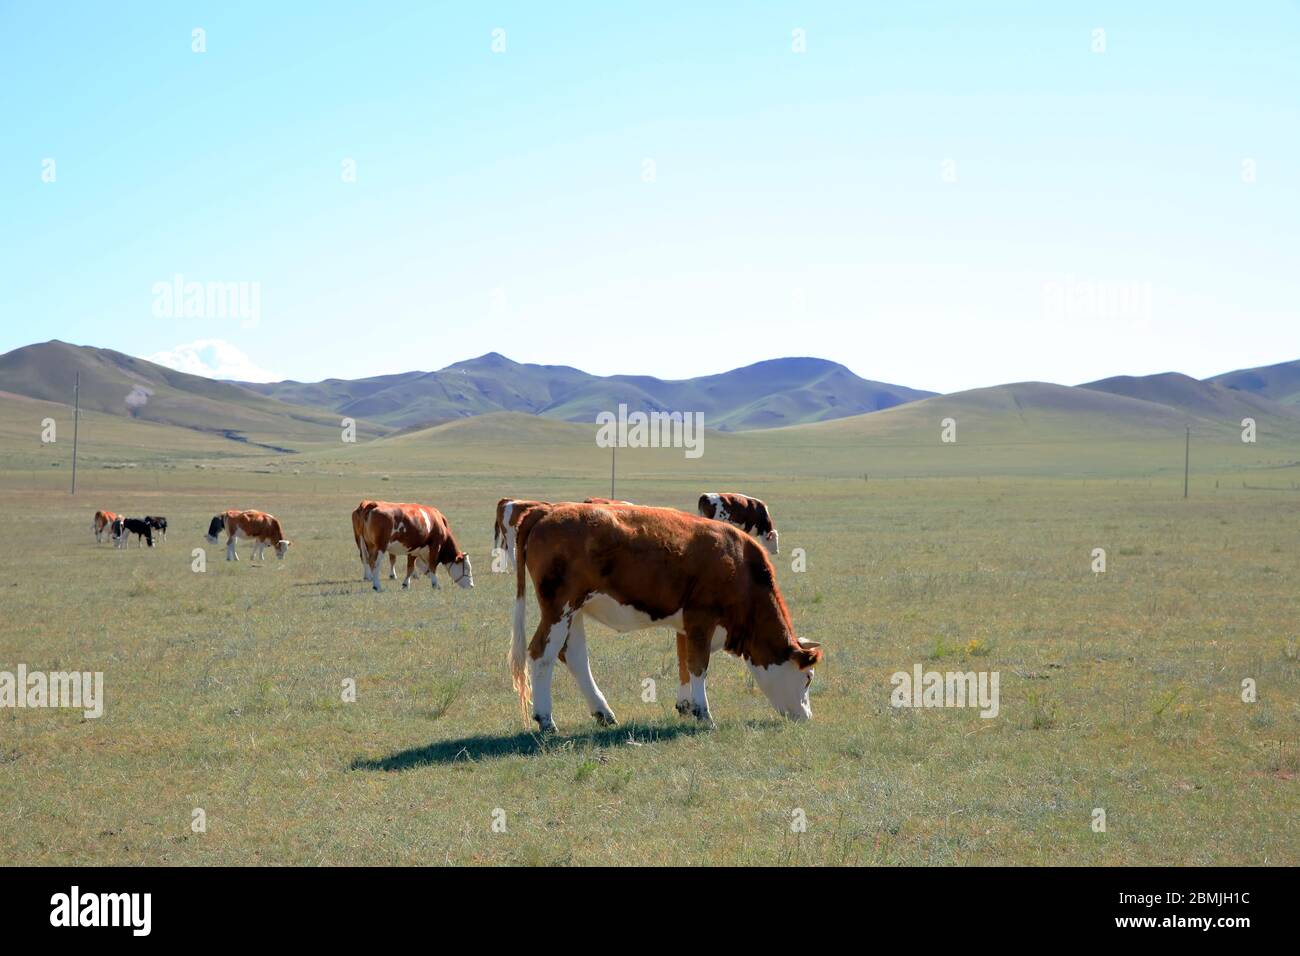 A herd of cattle are eating grass on the grassland Stock Photo